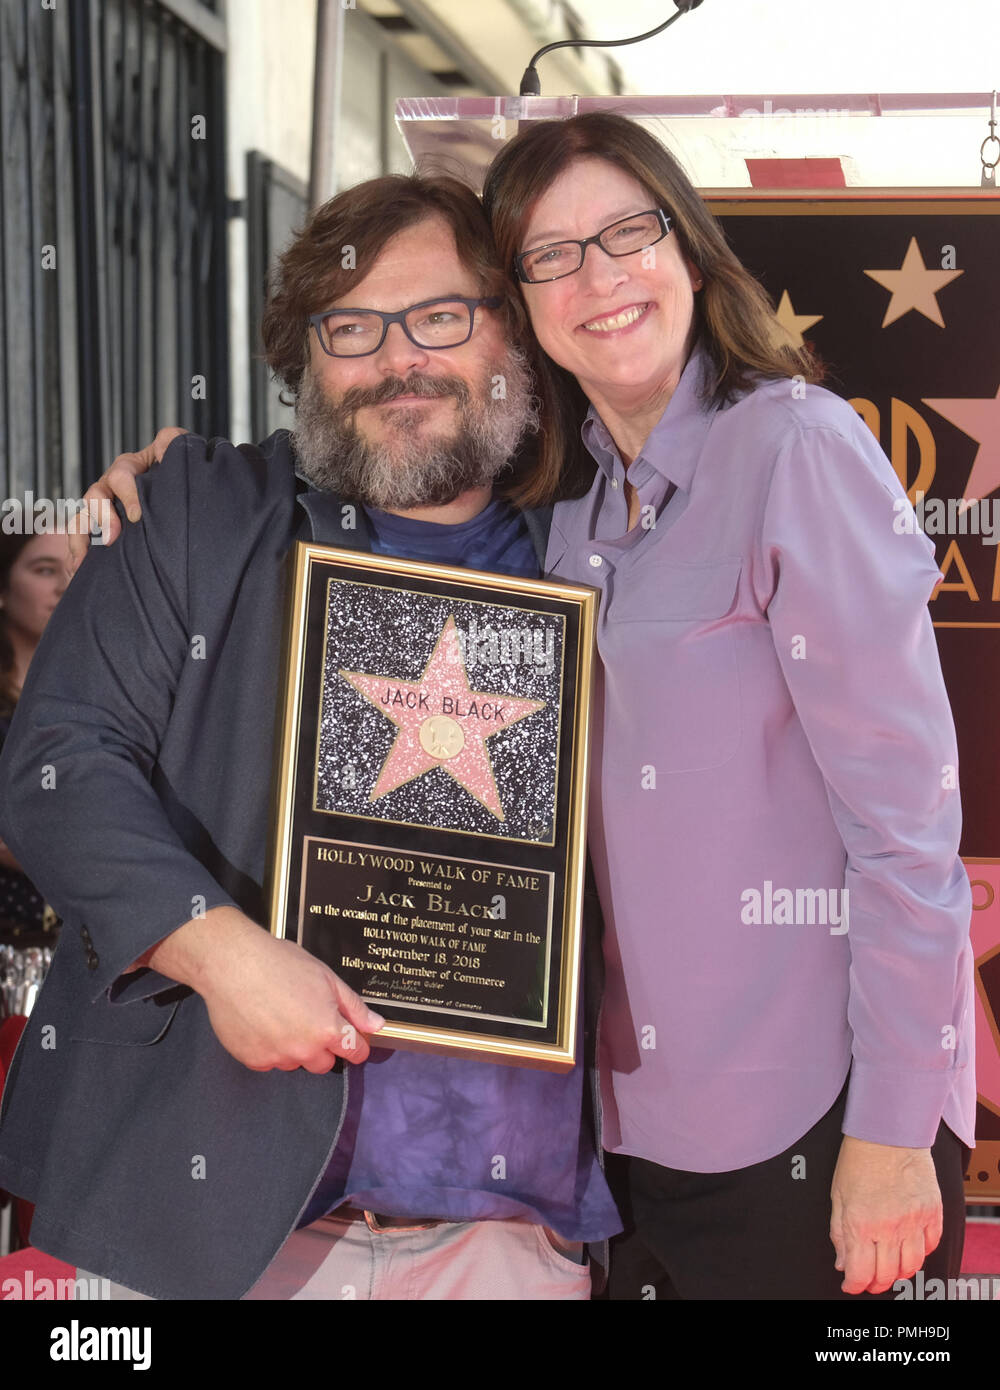 Los Angeles, California, USA. 18th Sep, 2018. Actor Jack Black, left, poses  with his sister star ceremony on the Hollywood Walk of Fame Star where he  was the recipient of the 2,645th